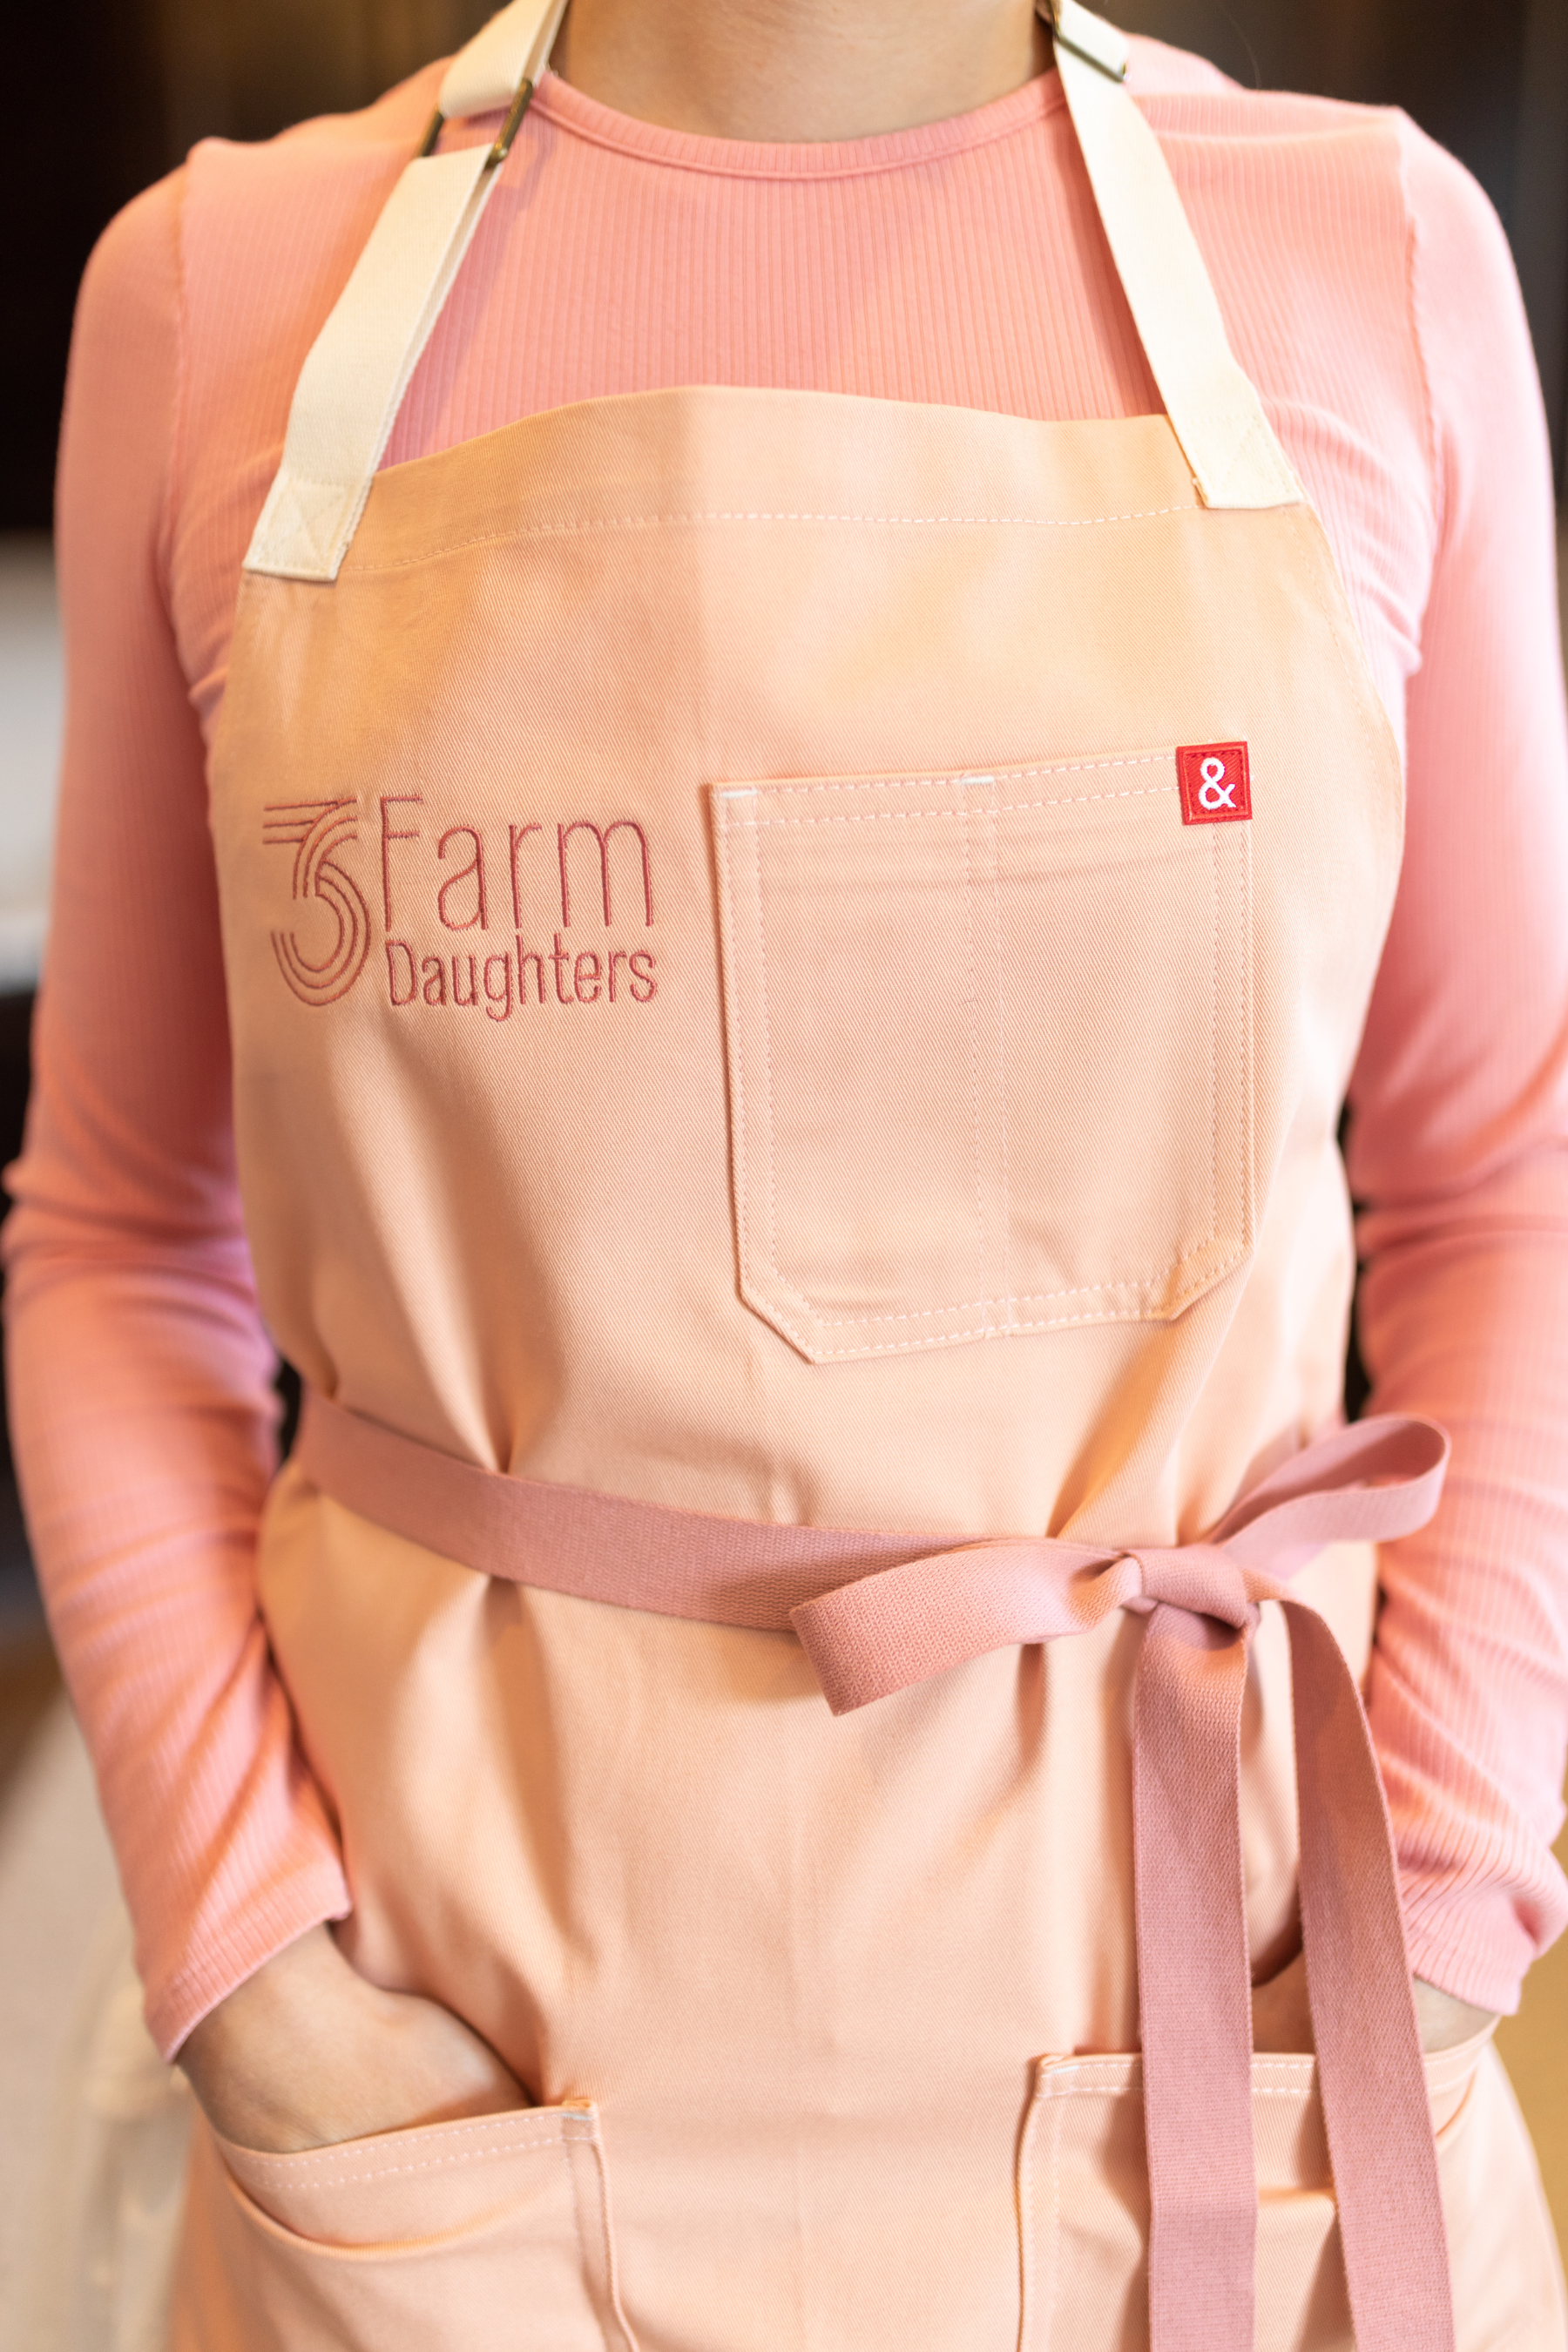 Sturdy, durable cooking apron